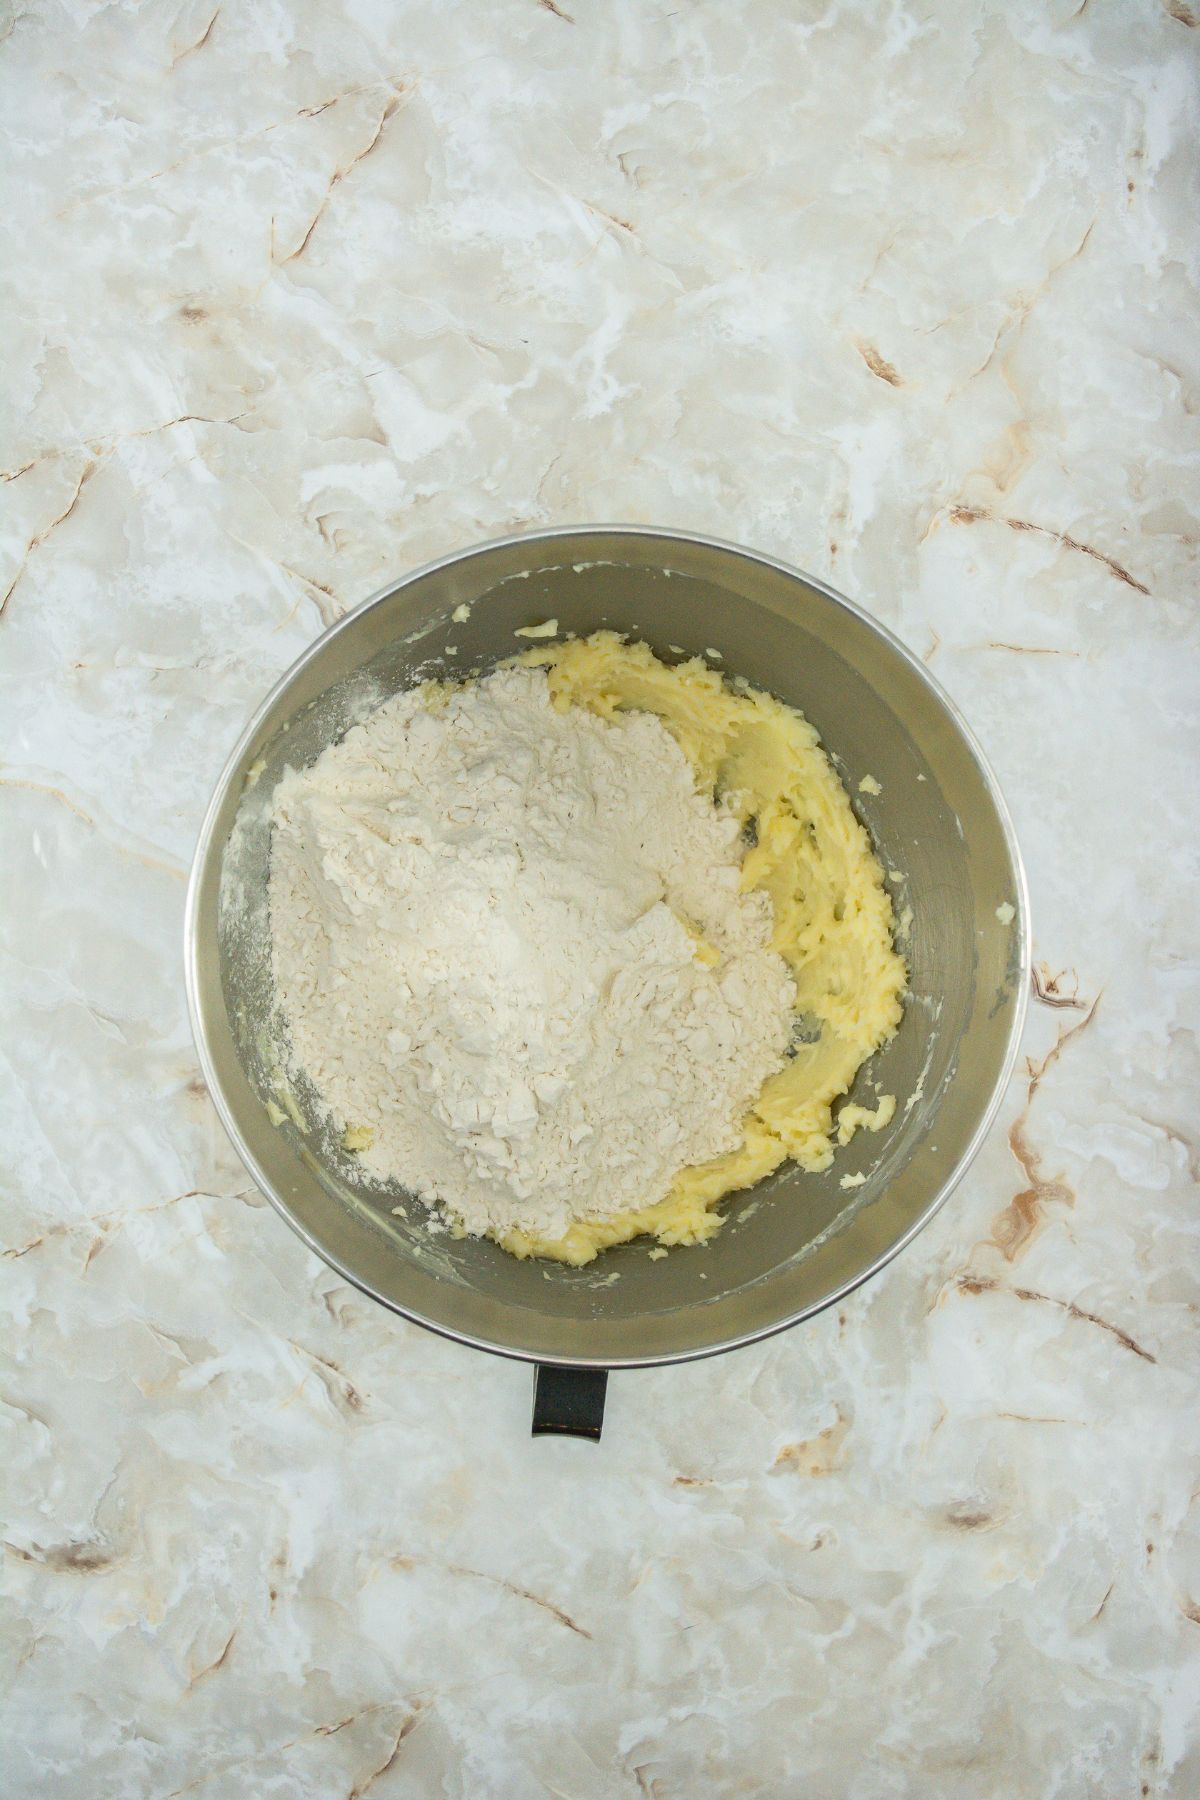 Cookie dough with flour in a mixing bowl.